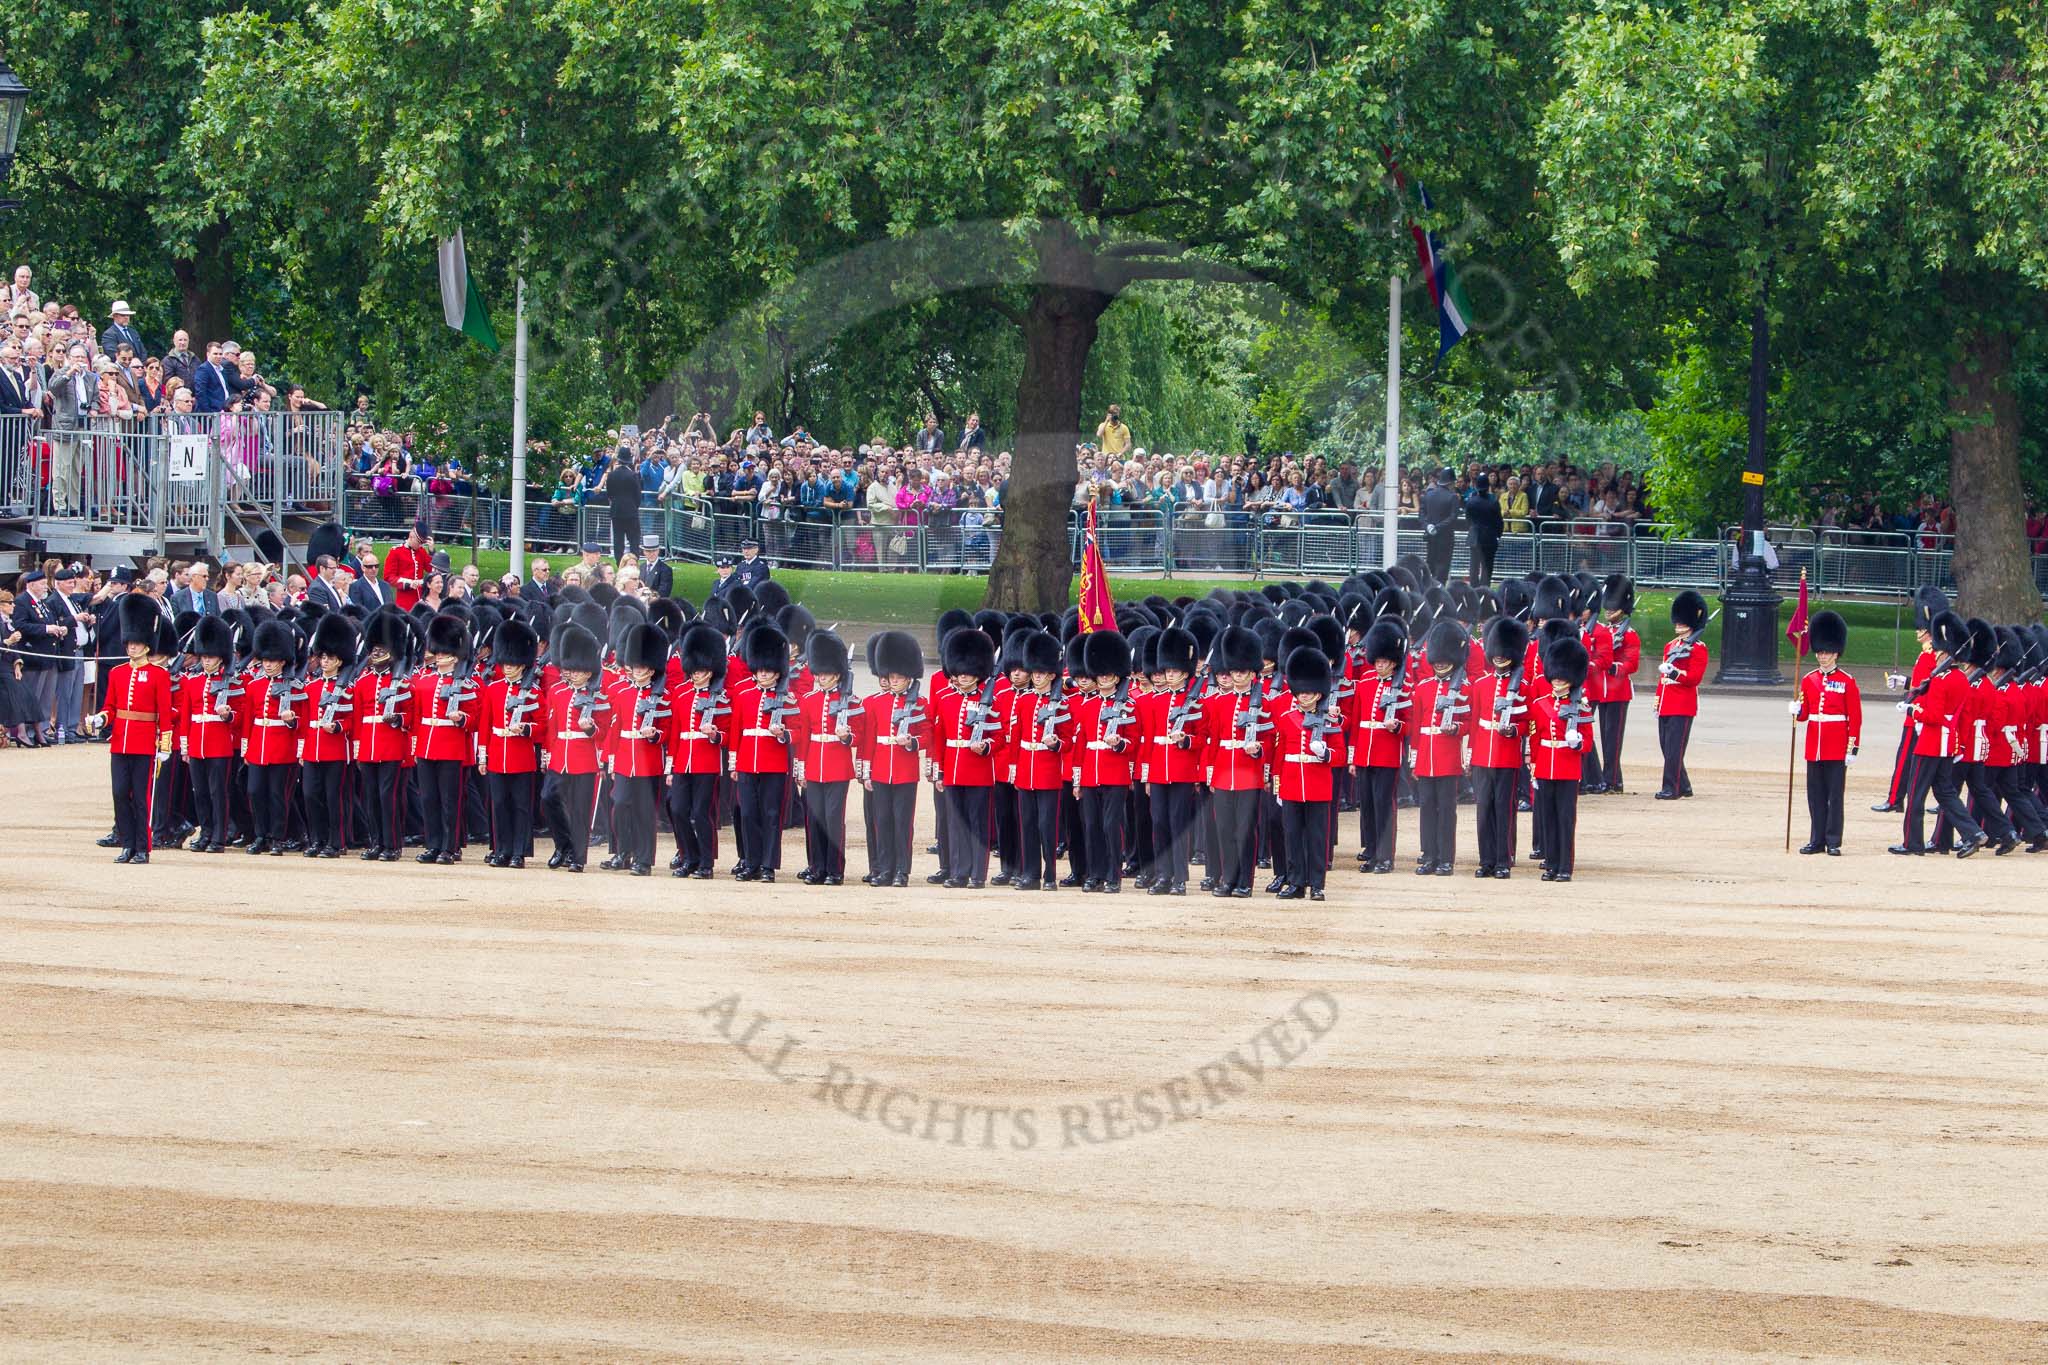 Trooping the Colour 2014.
Horse Guards Parade, Westminster,
London SW1A,

United Kingdom,
on 14 June 2014 at 11:34, image #597